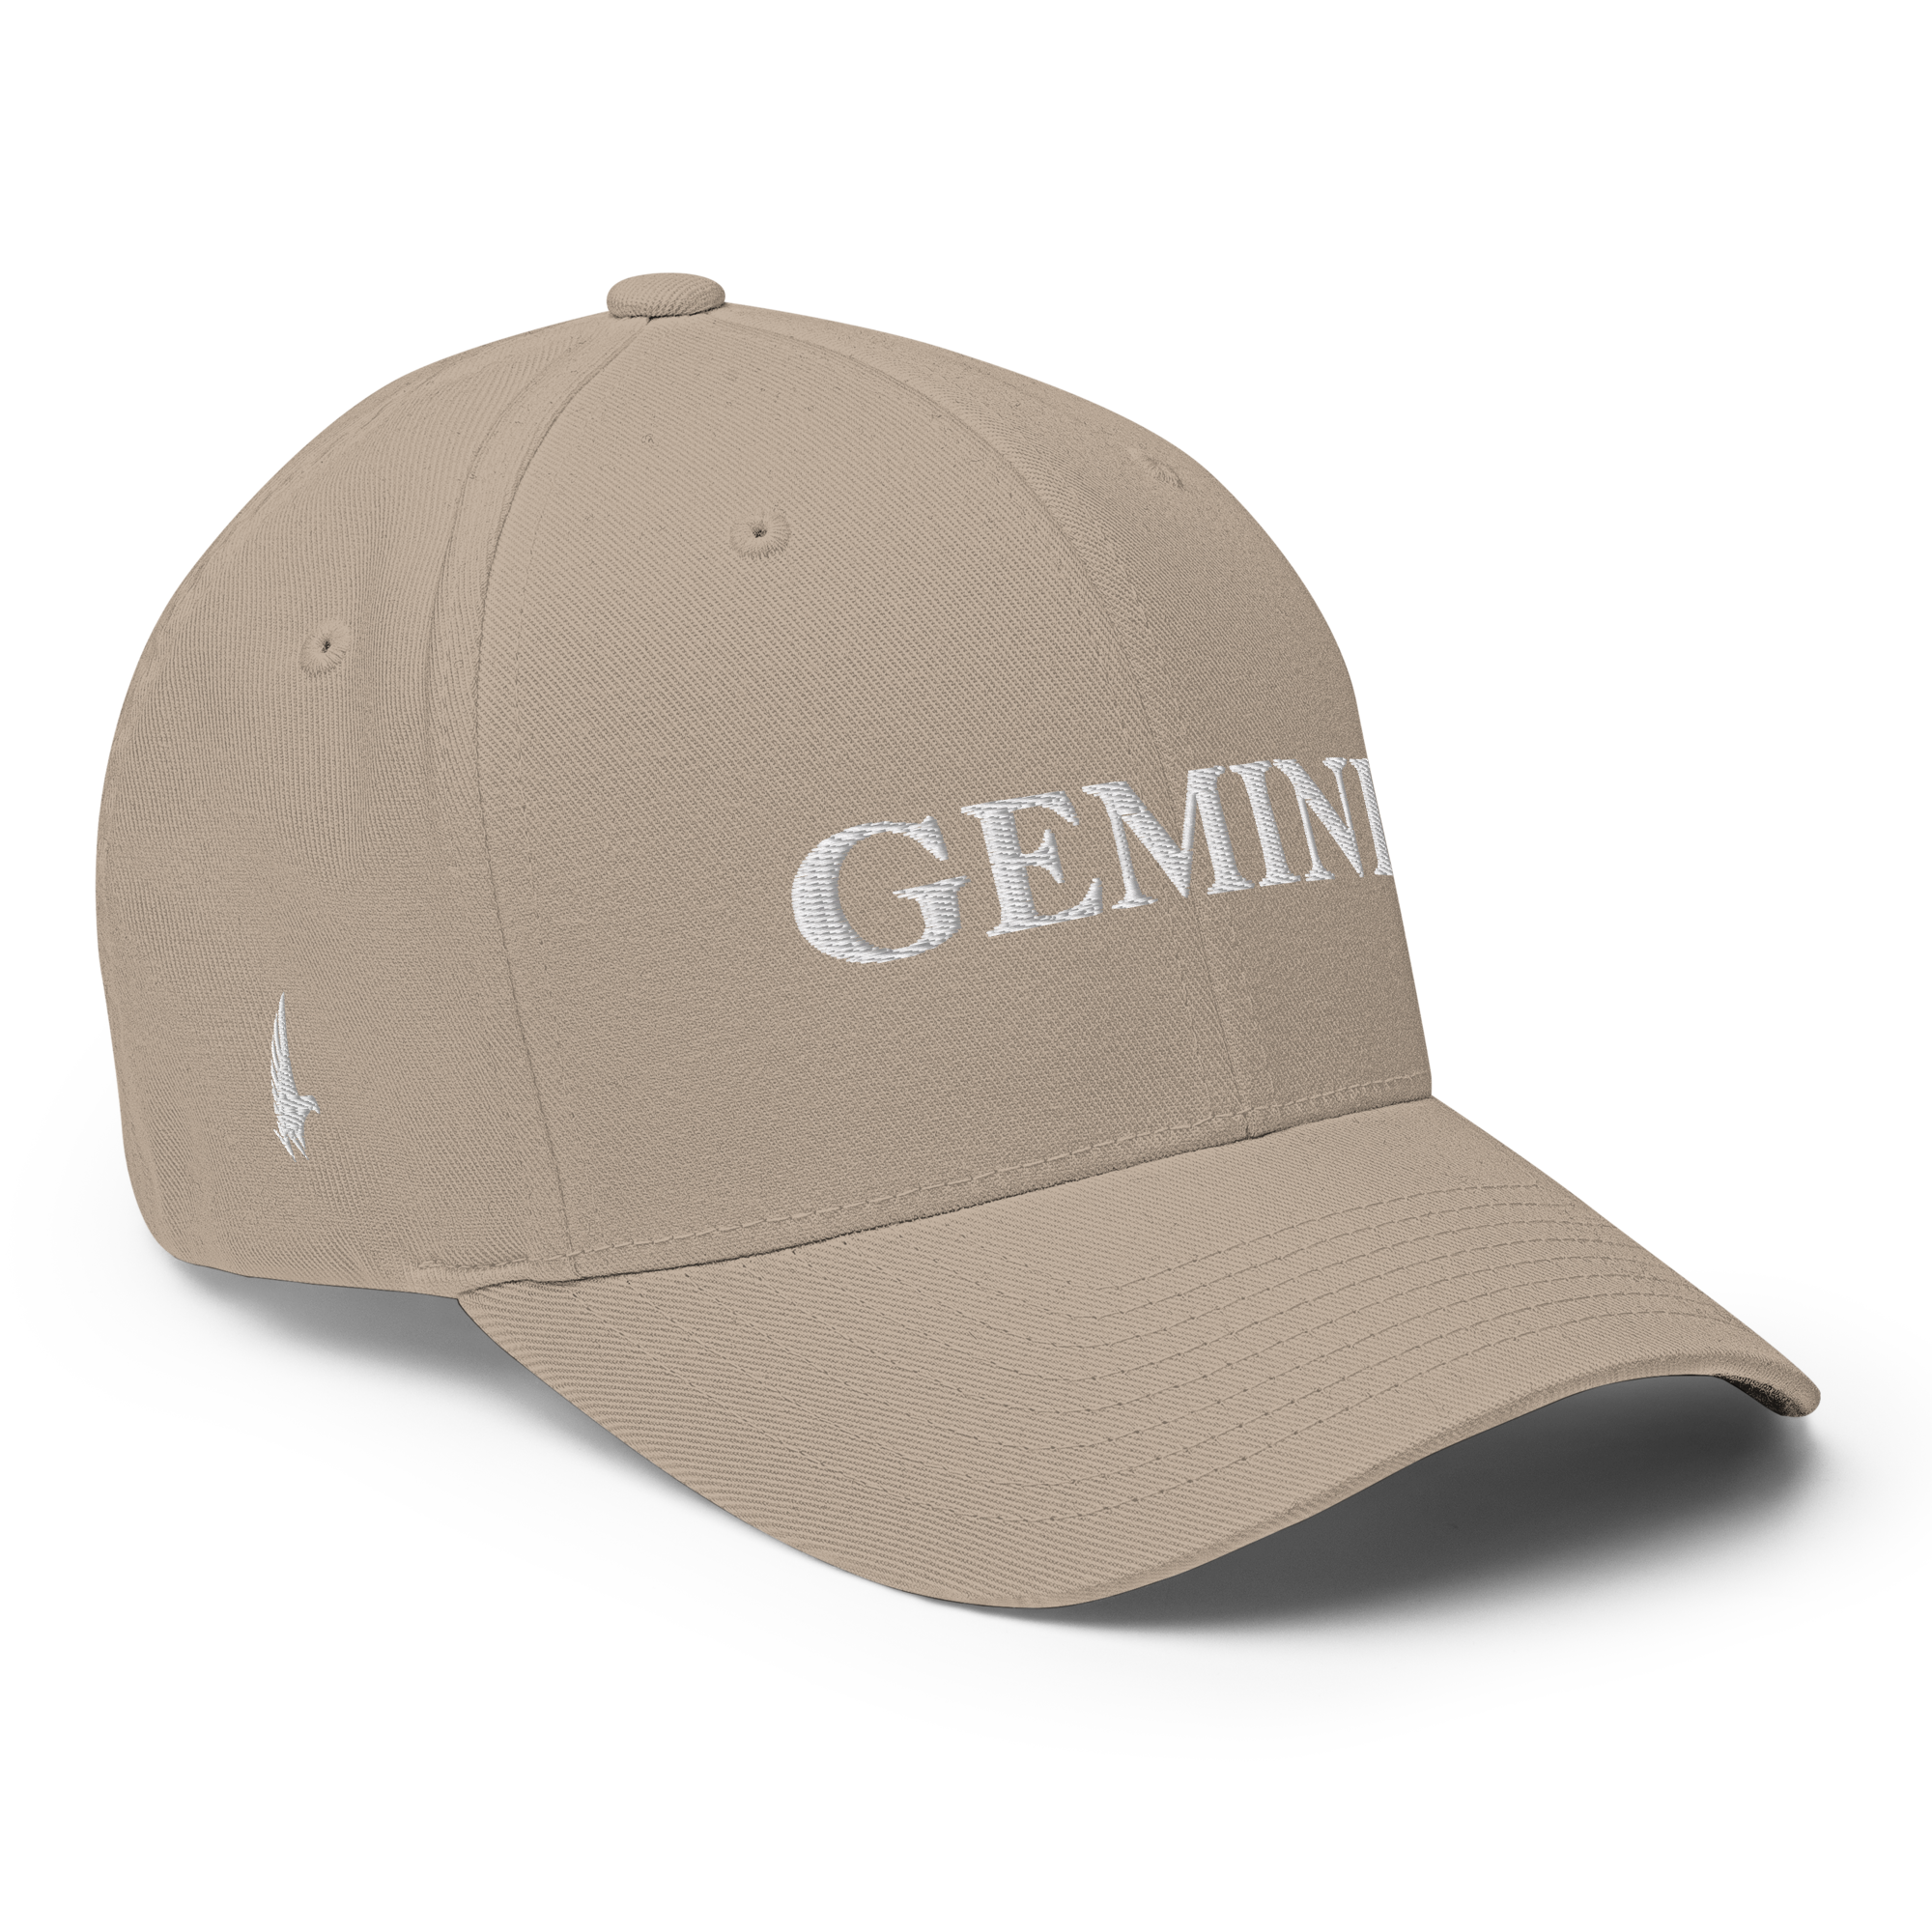 Original Gemini Fitted Hat Sandstone Fitted - Loyalty Vibes